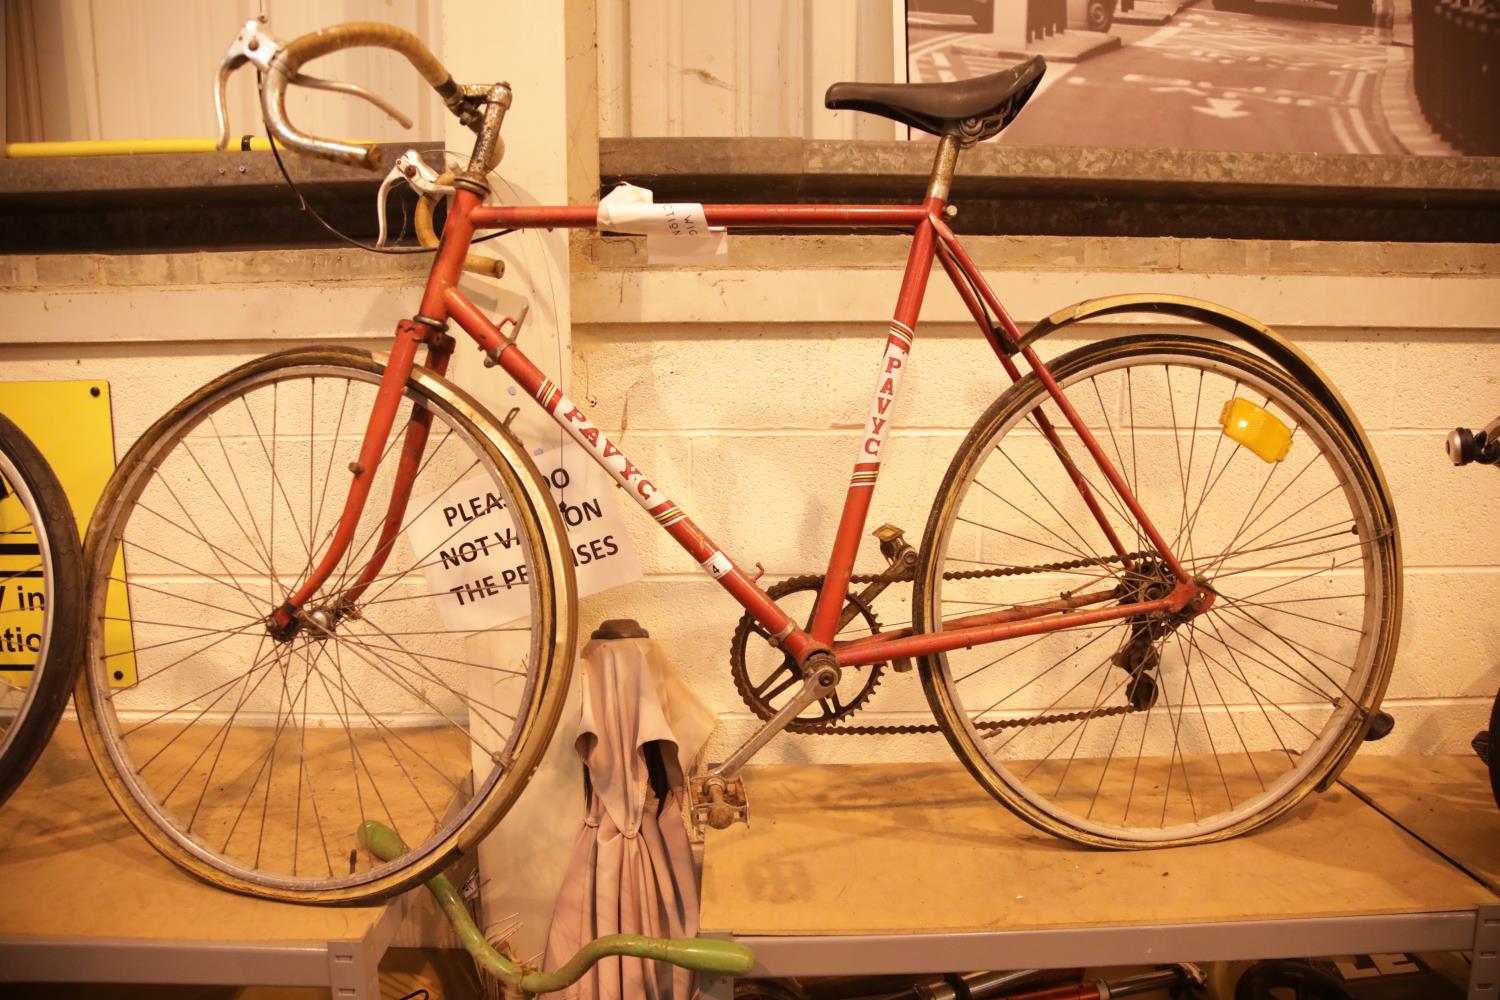 Pavyc red gents racing bike. Not available for in-house P&P.